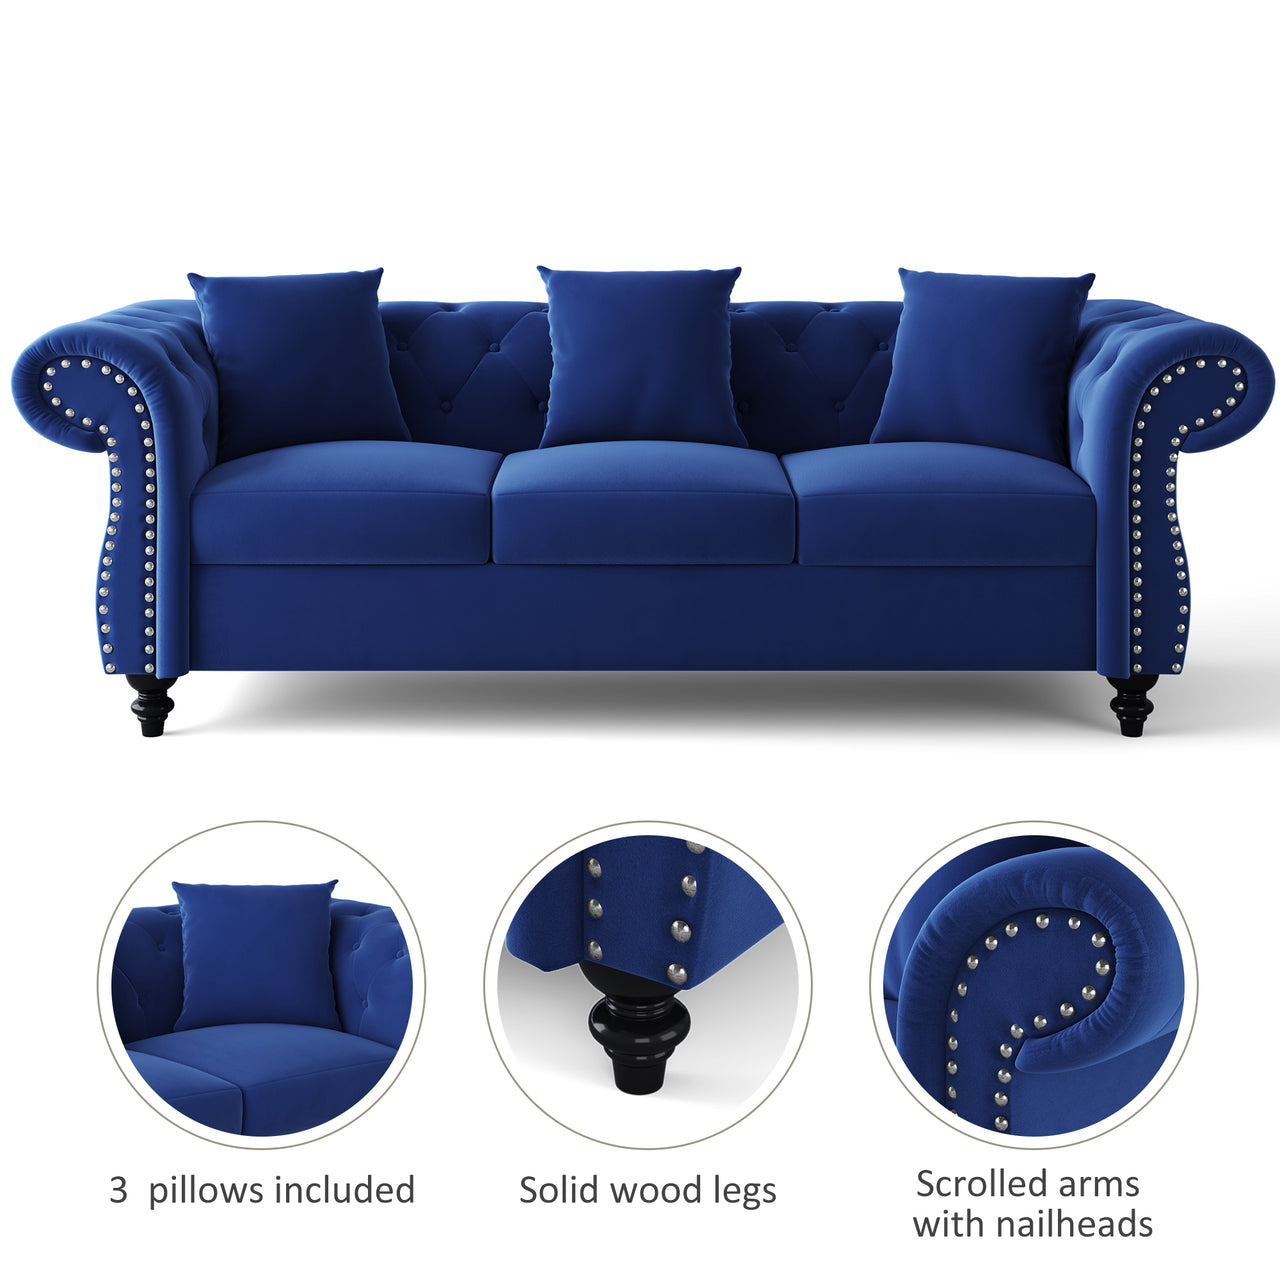 [New] 80 Chesterfield Sofa Tufted Velvet Upholstered 3-Seater Sofa Scrolled Arms With Nailhead Decoration,3 Pillows included